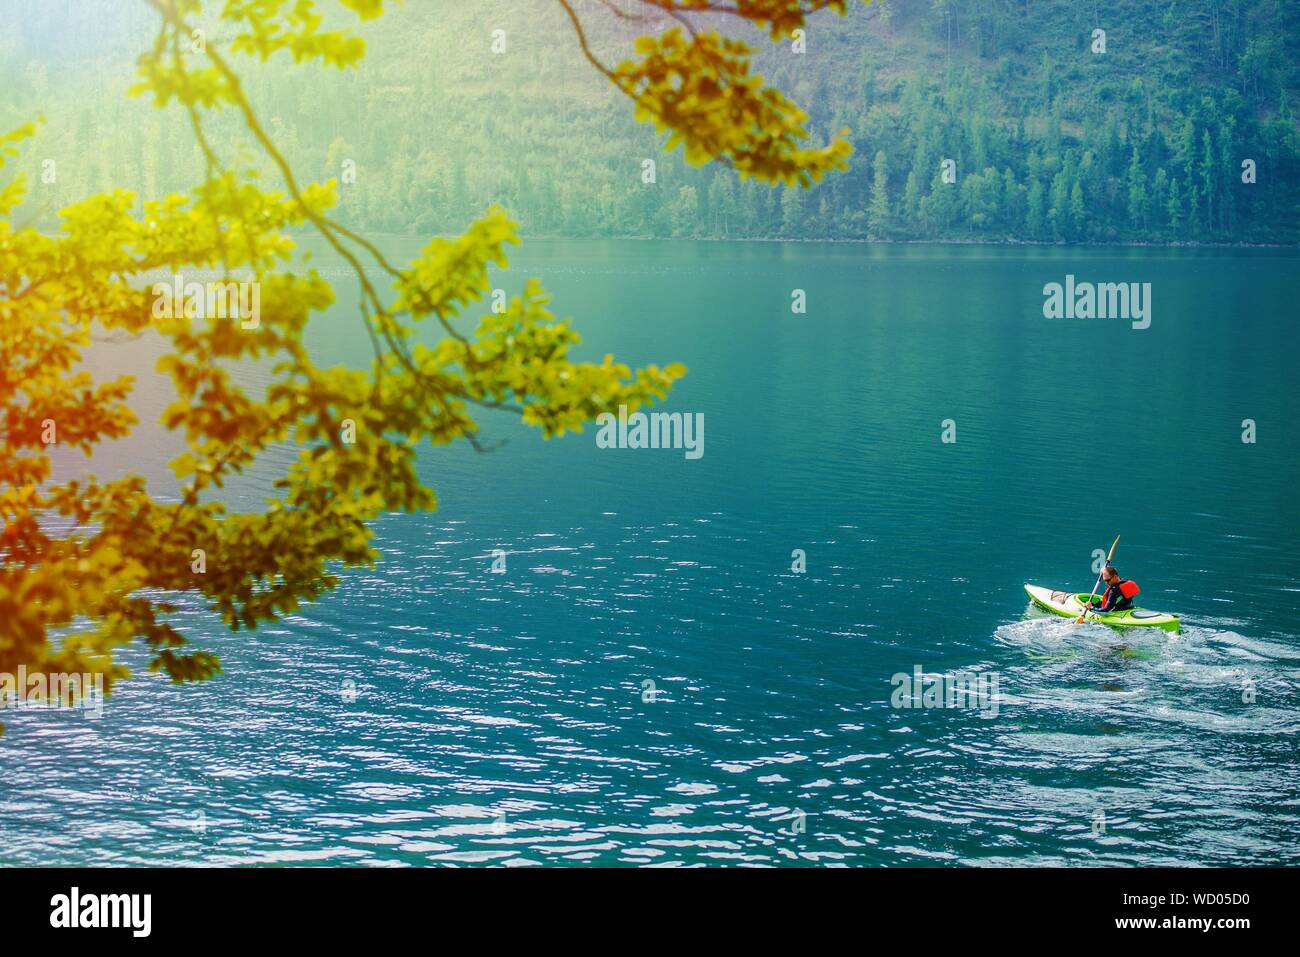 Branches Against Man Kayaking On Turquoise River Stock Photo